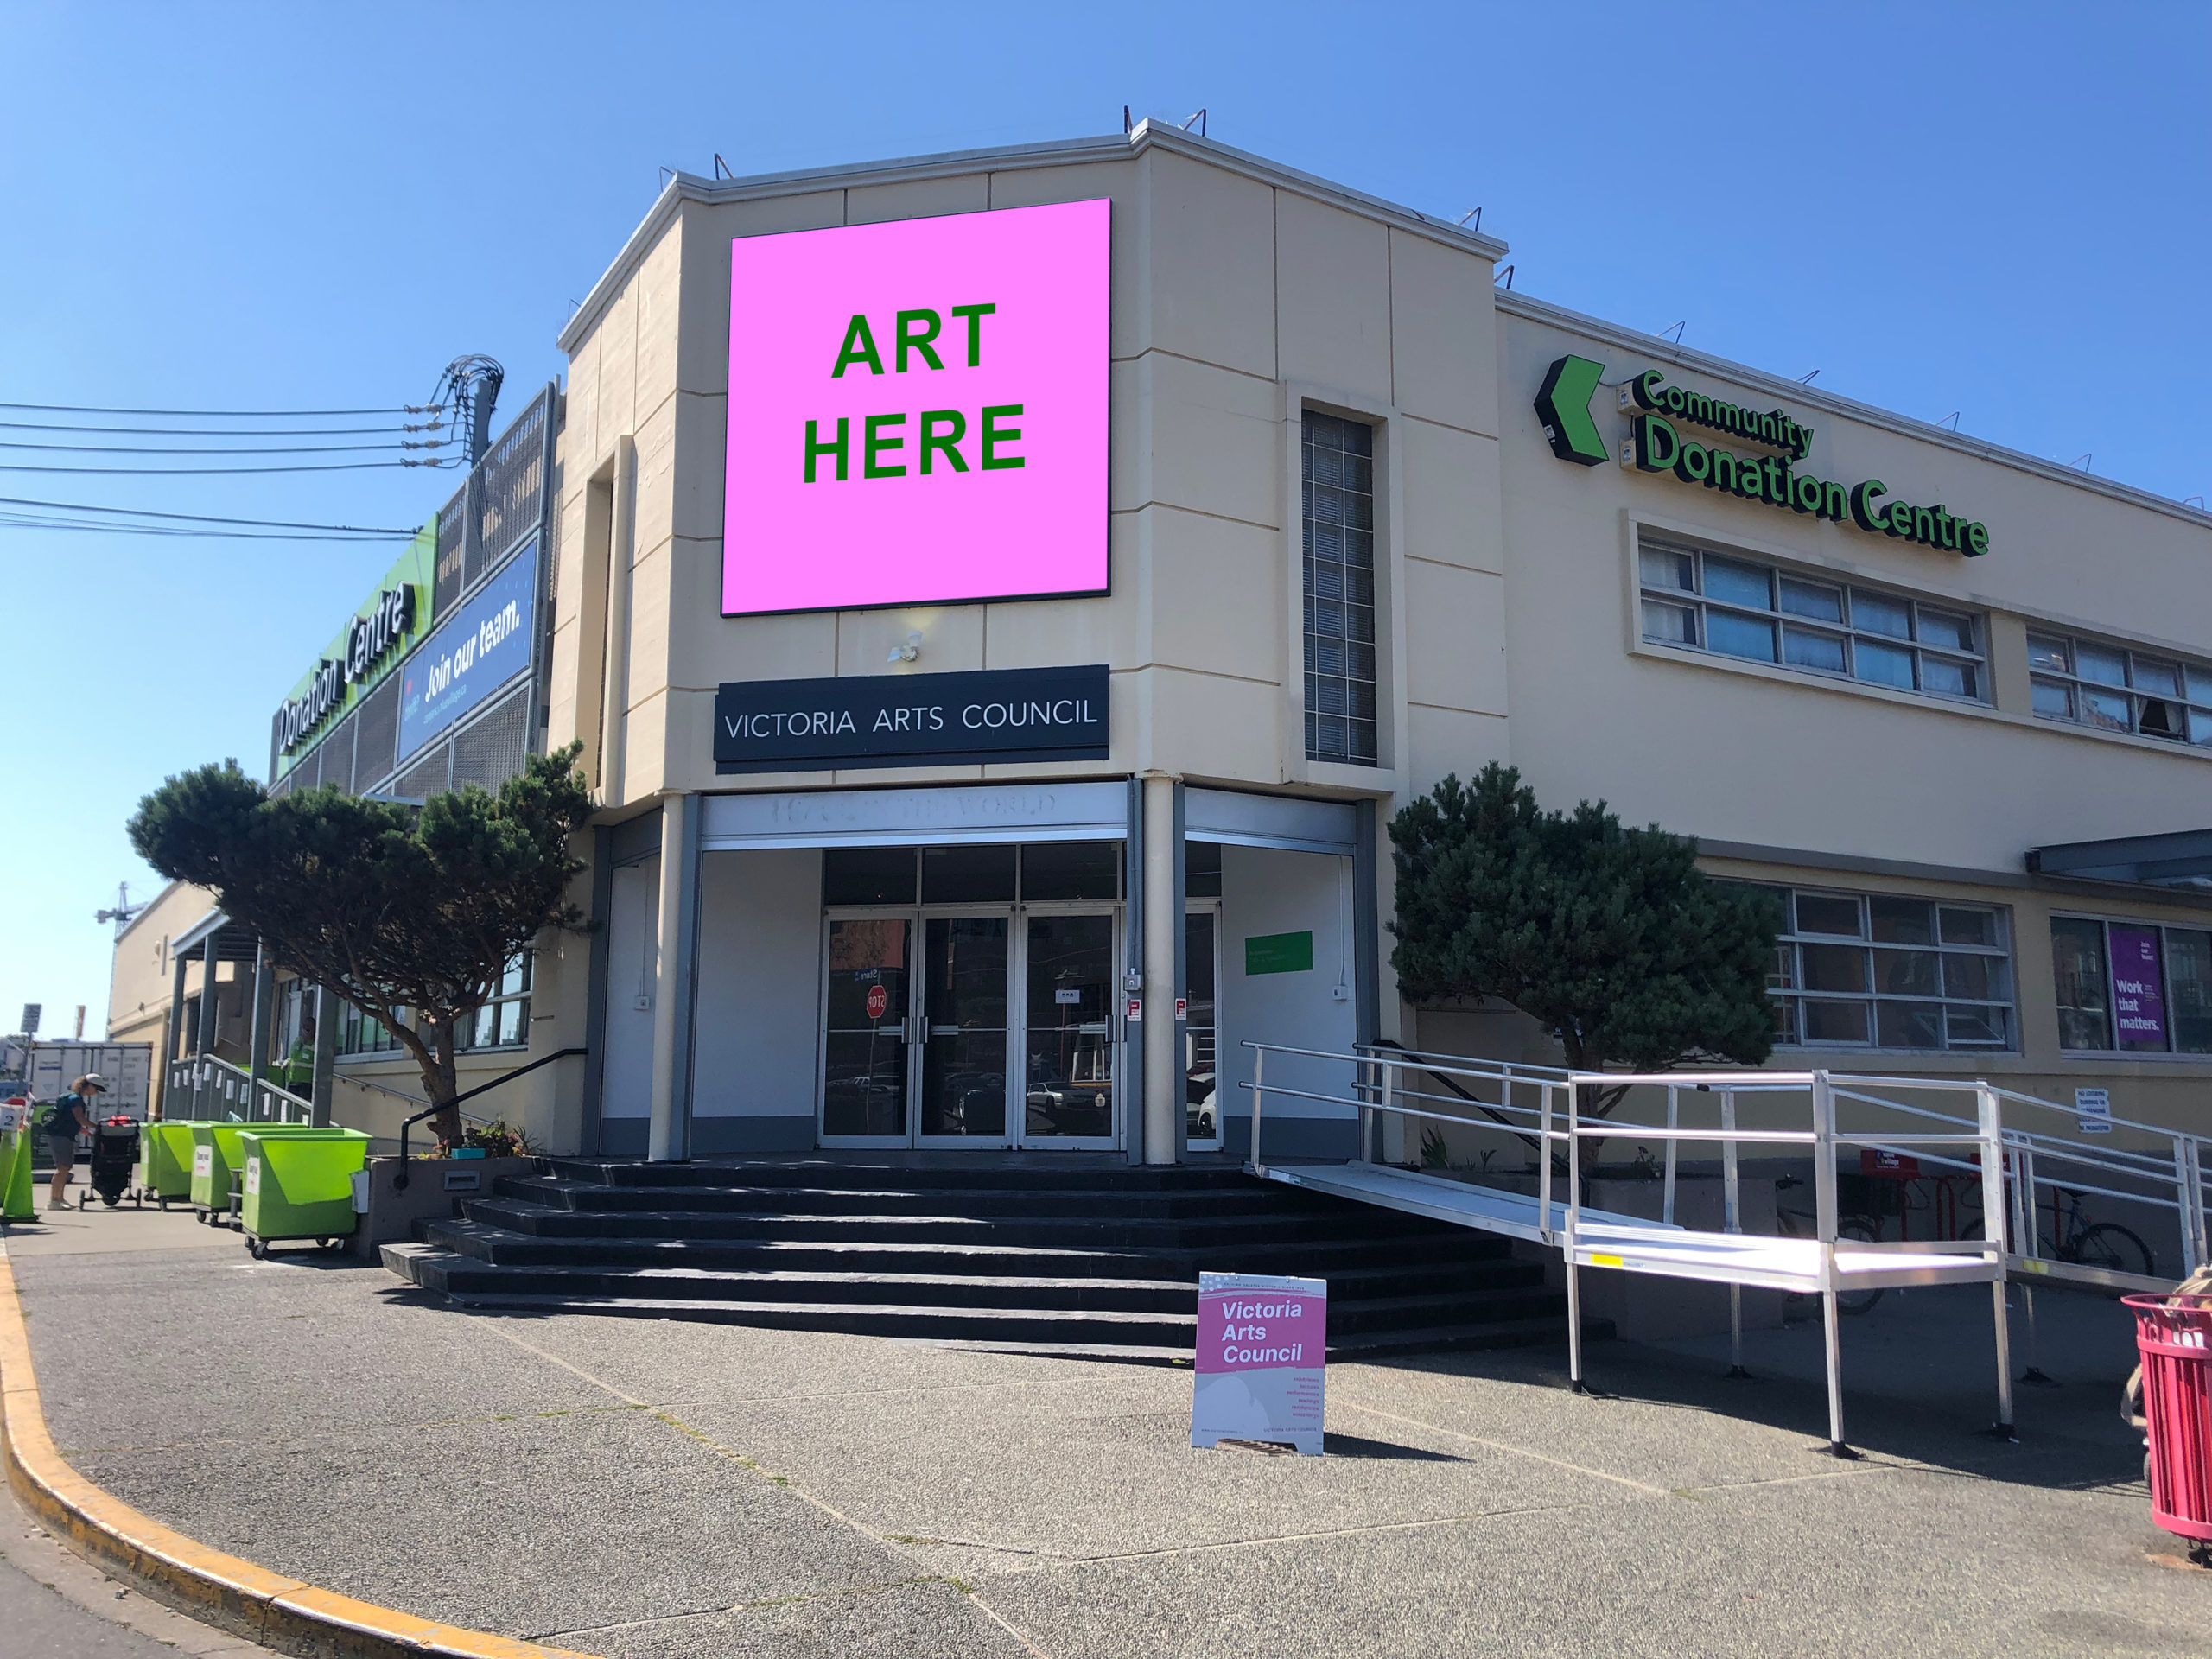 The Victoria Arts Council building on a sunny day with a mock-up of a billboard sign on that says "ART HERE" for a call to artists